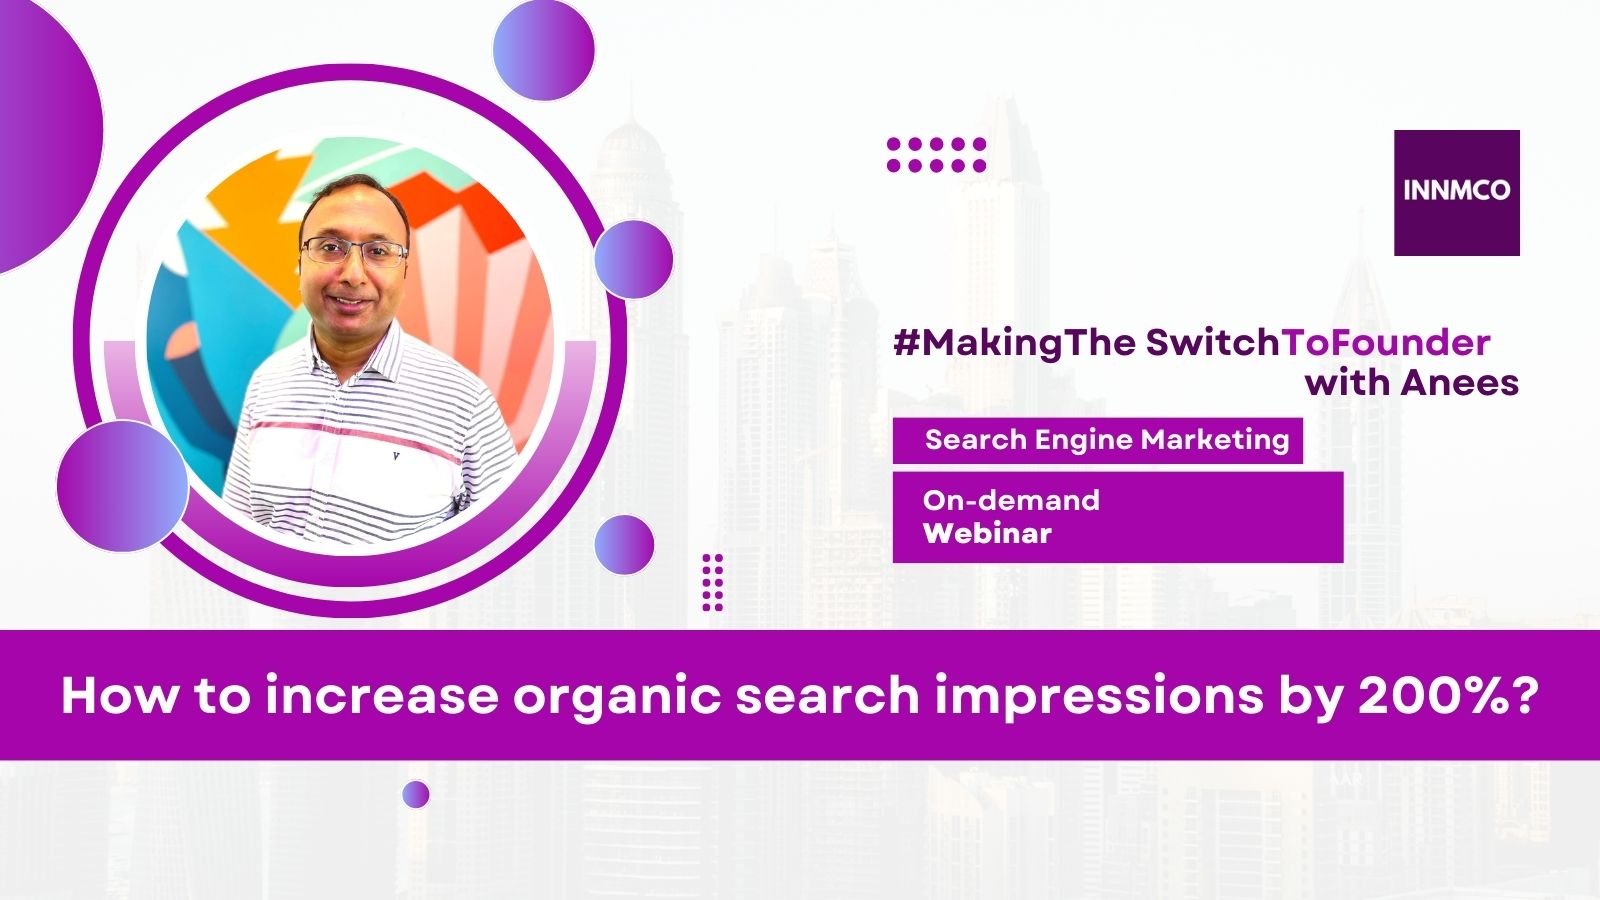 INNMCO On-demand Webinar Banner 2023 - How to increase organic search impressions by 200%